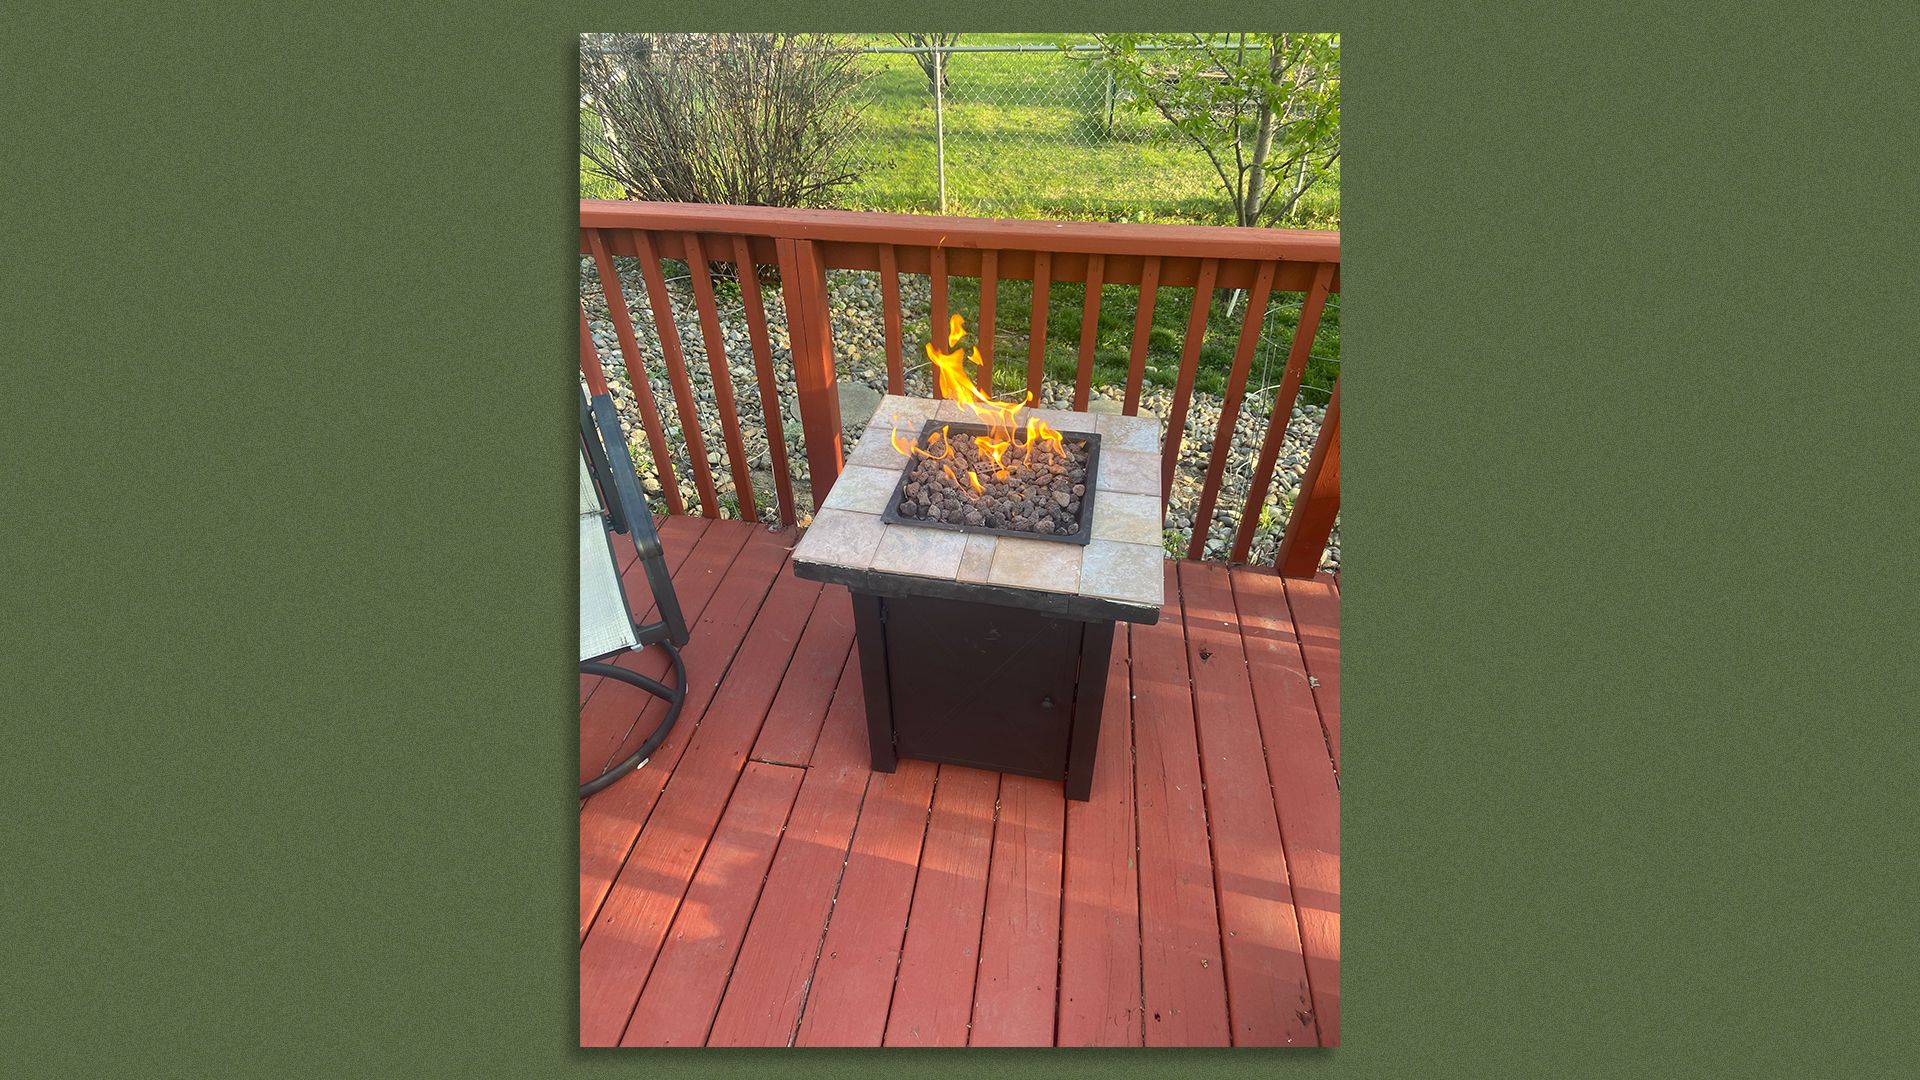 A photo of a fire pit.